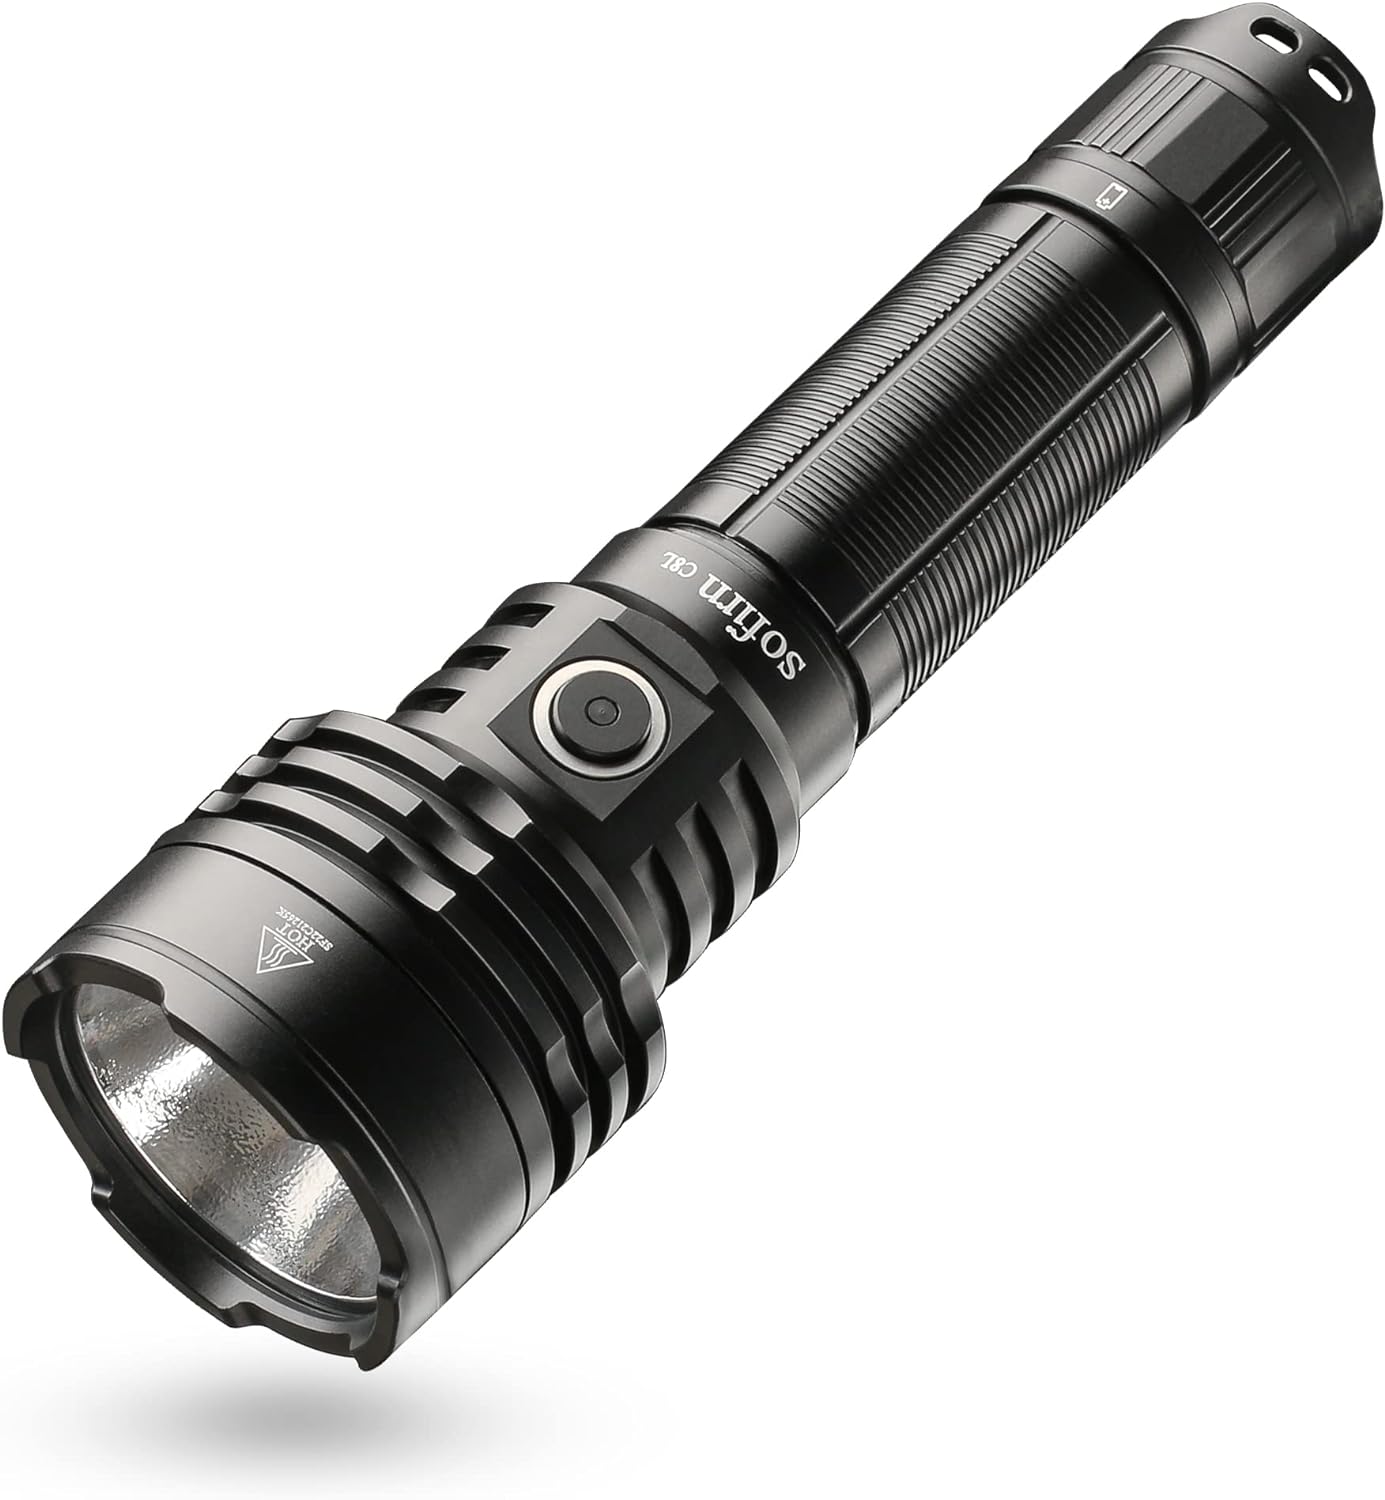 Sofirn C8L Rechargeable LED Tactical Flashlight $35.42 at Amazon with FREE Shipping